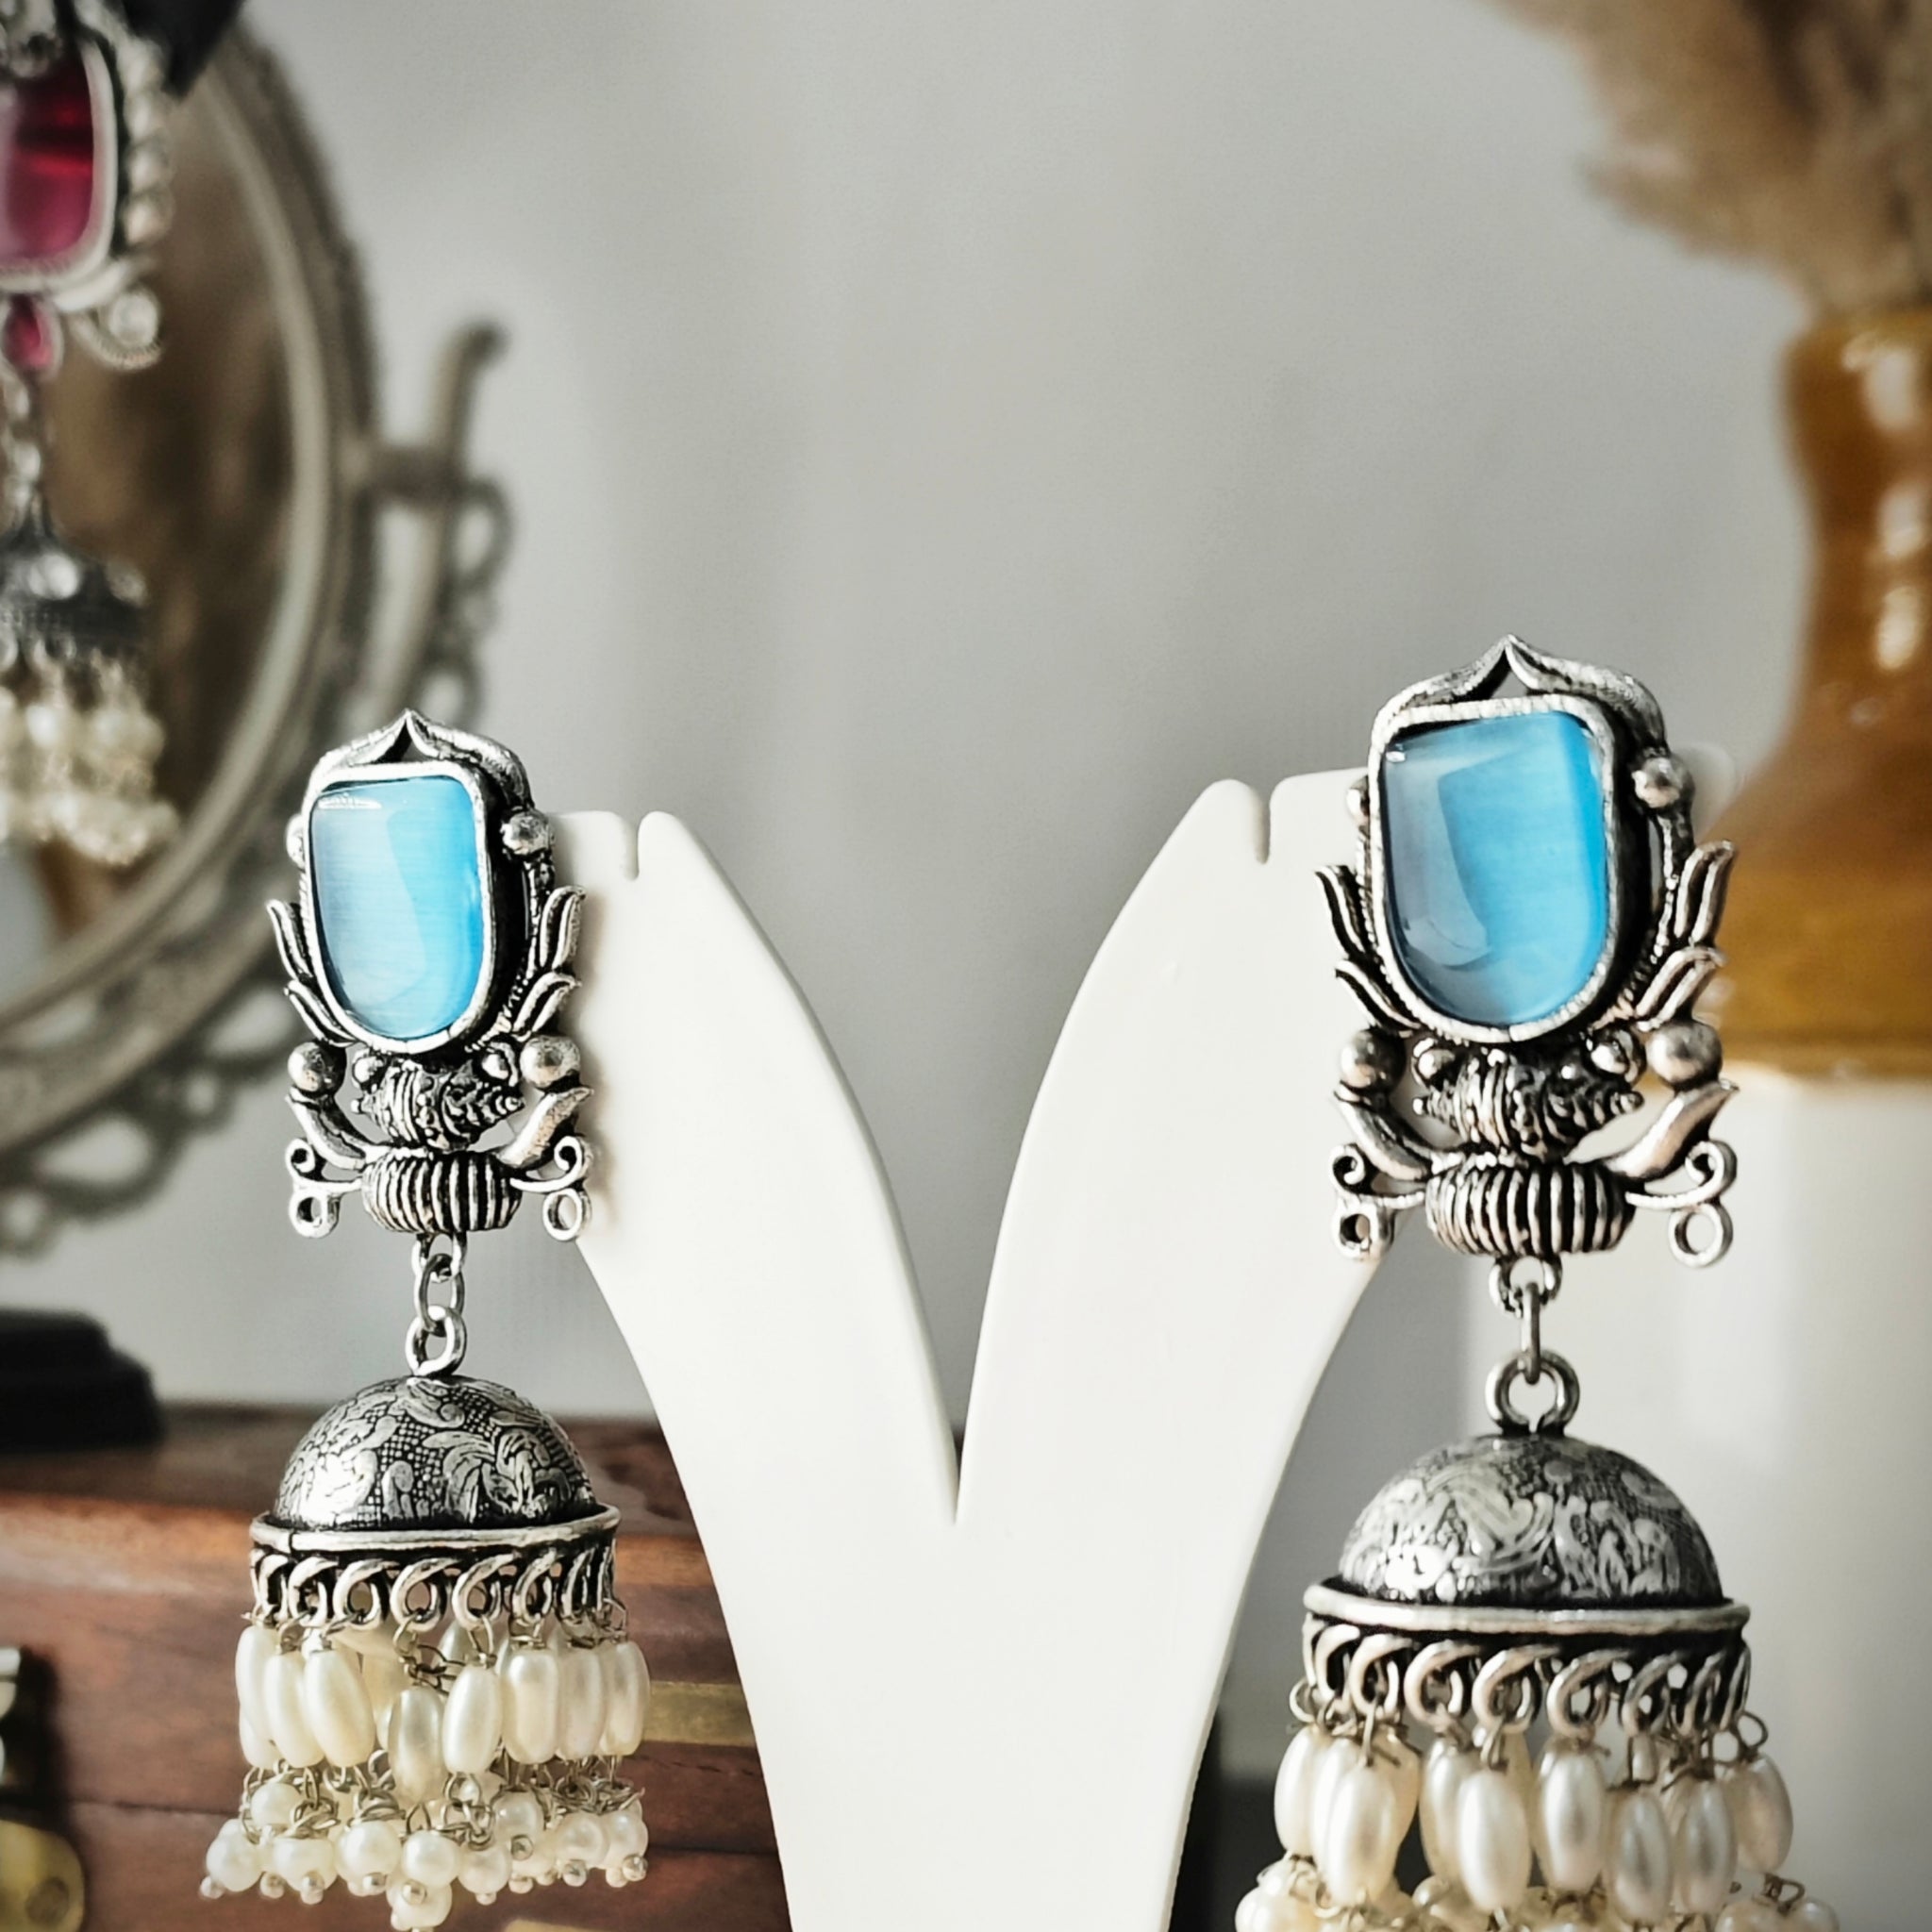 Badhao Jhumka Collection | Premium range from House of Mrigaya by Nandini | for Festive Occasions & Traditional Look- Light Blue - Mrigaya India